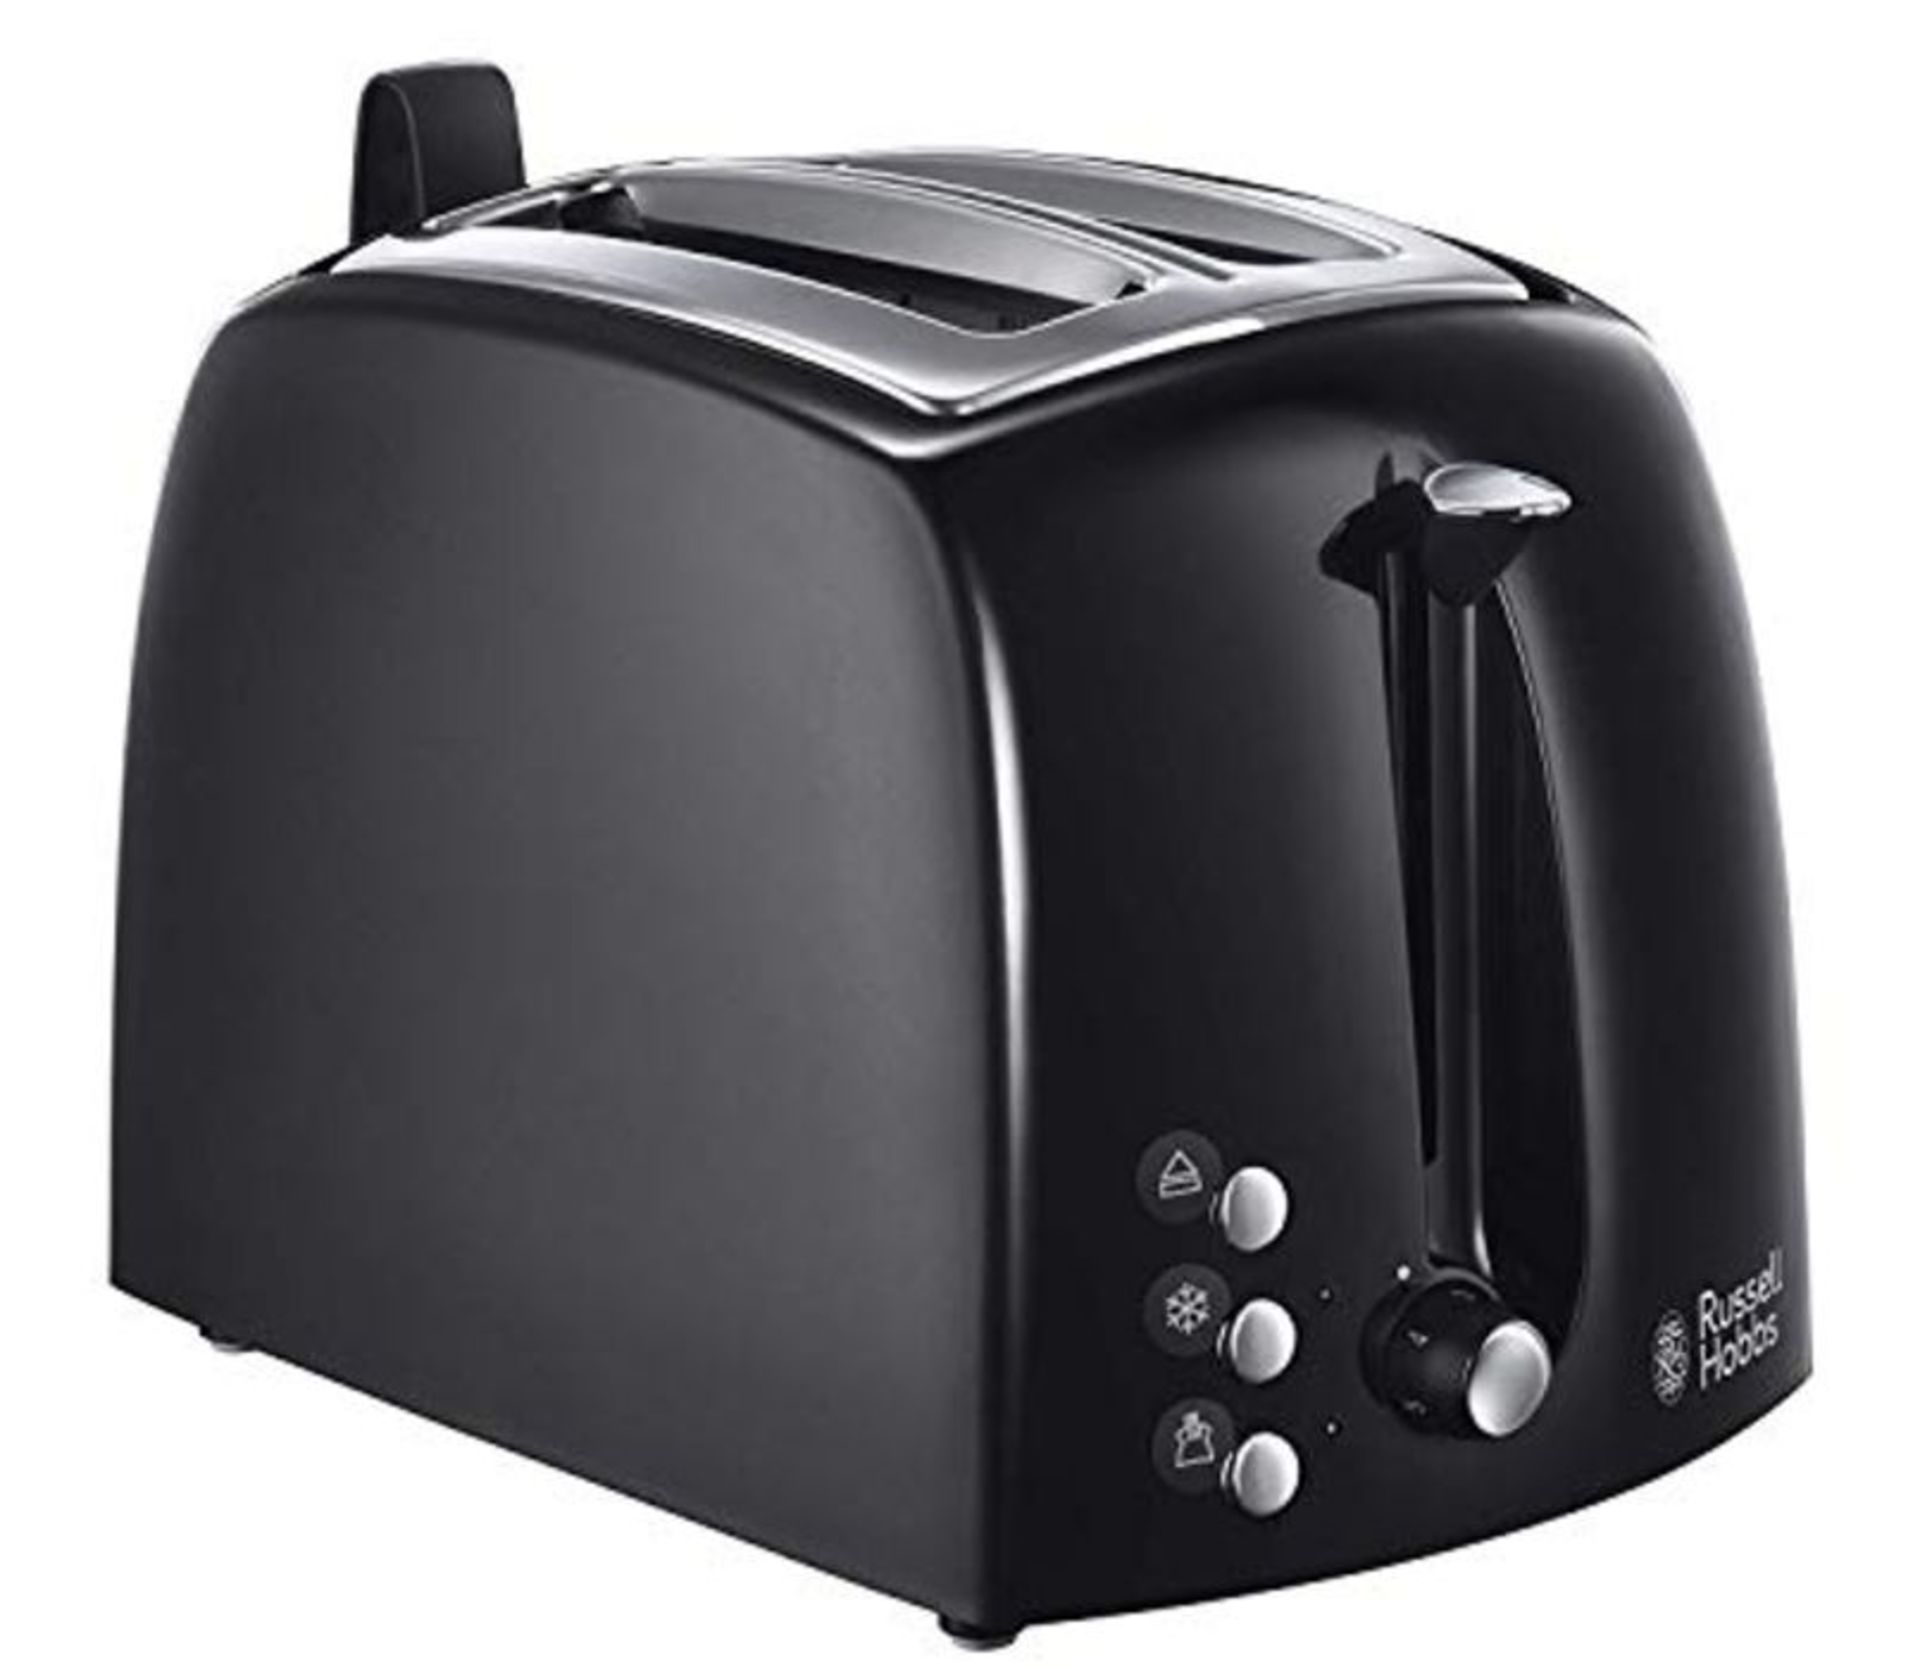 Russell Hobbs Toaster Textures , 2 extra wide toast slots, bun attachment & integrate